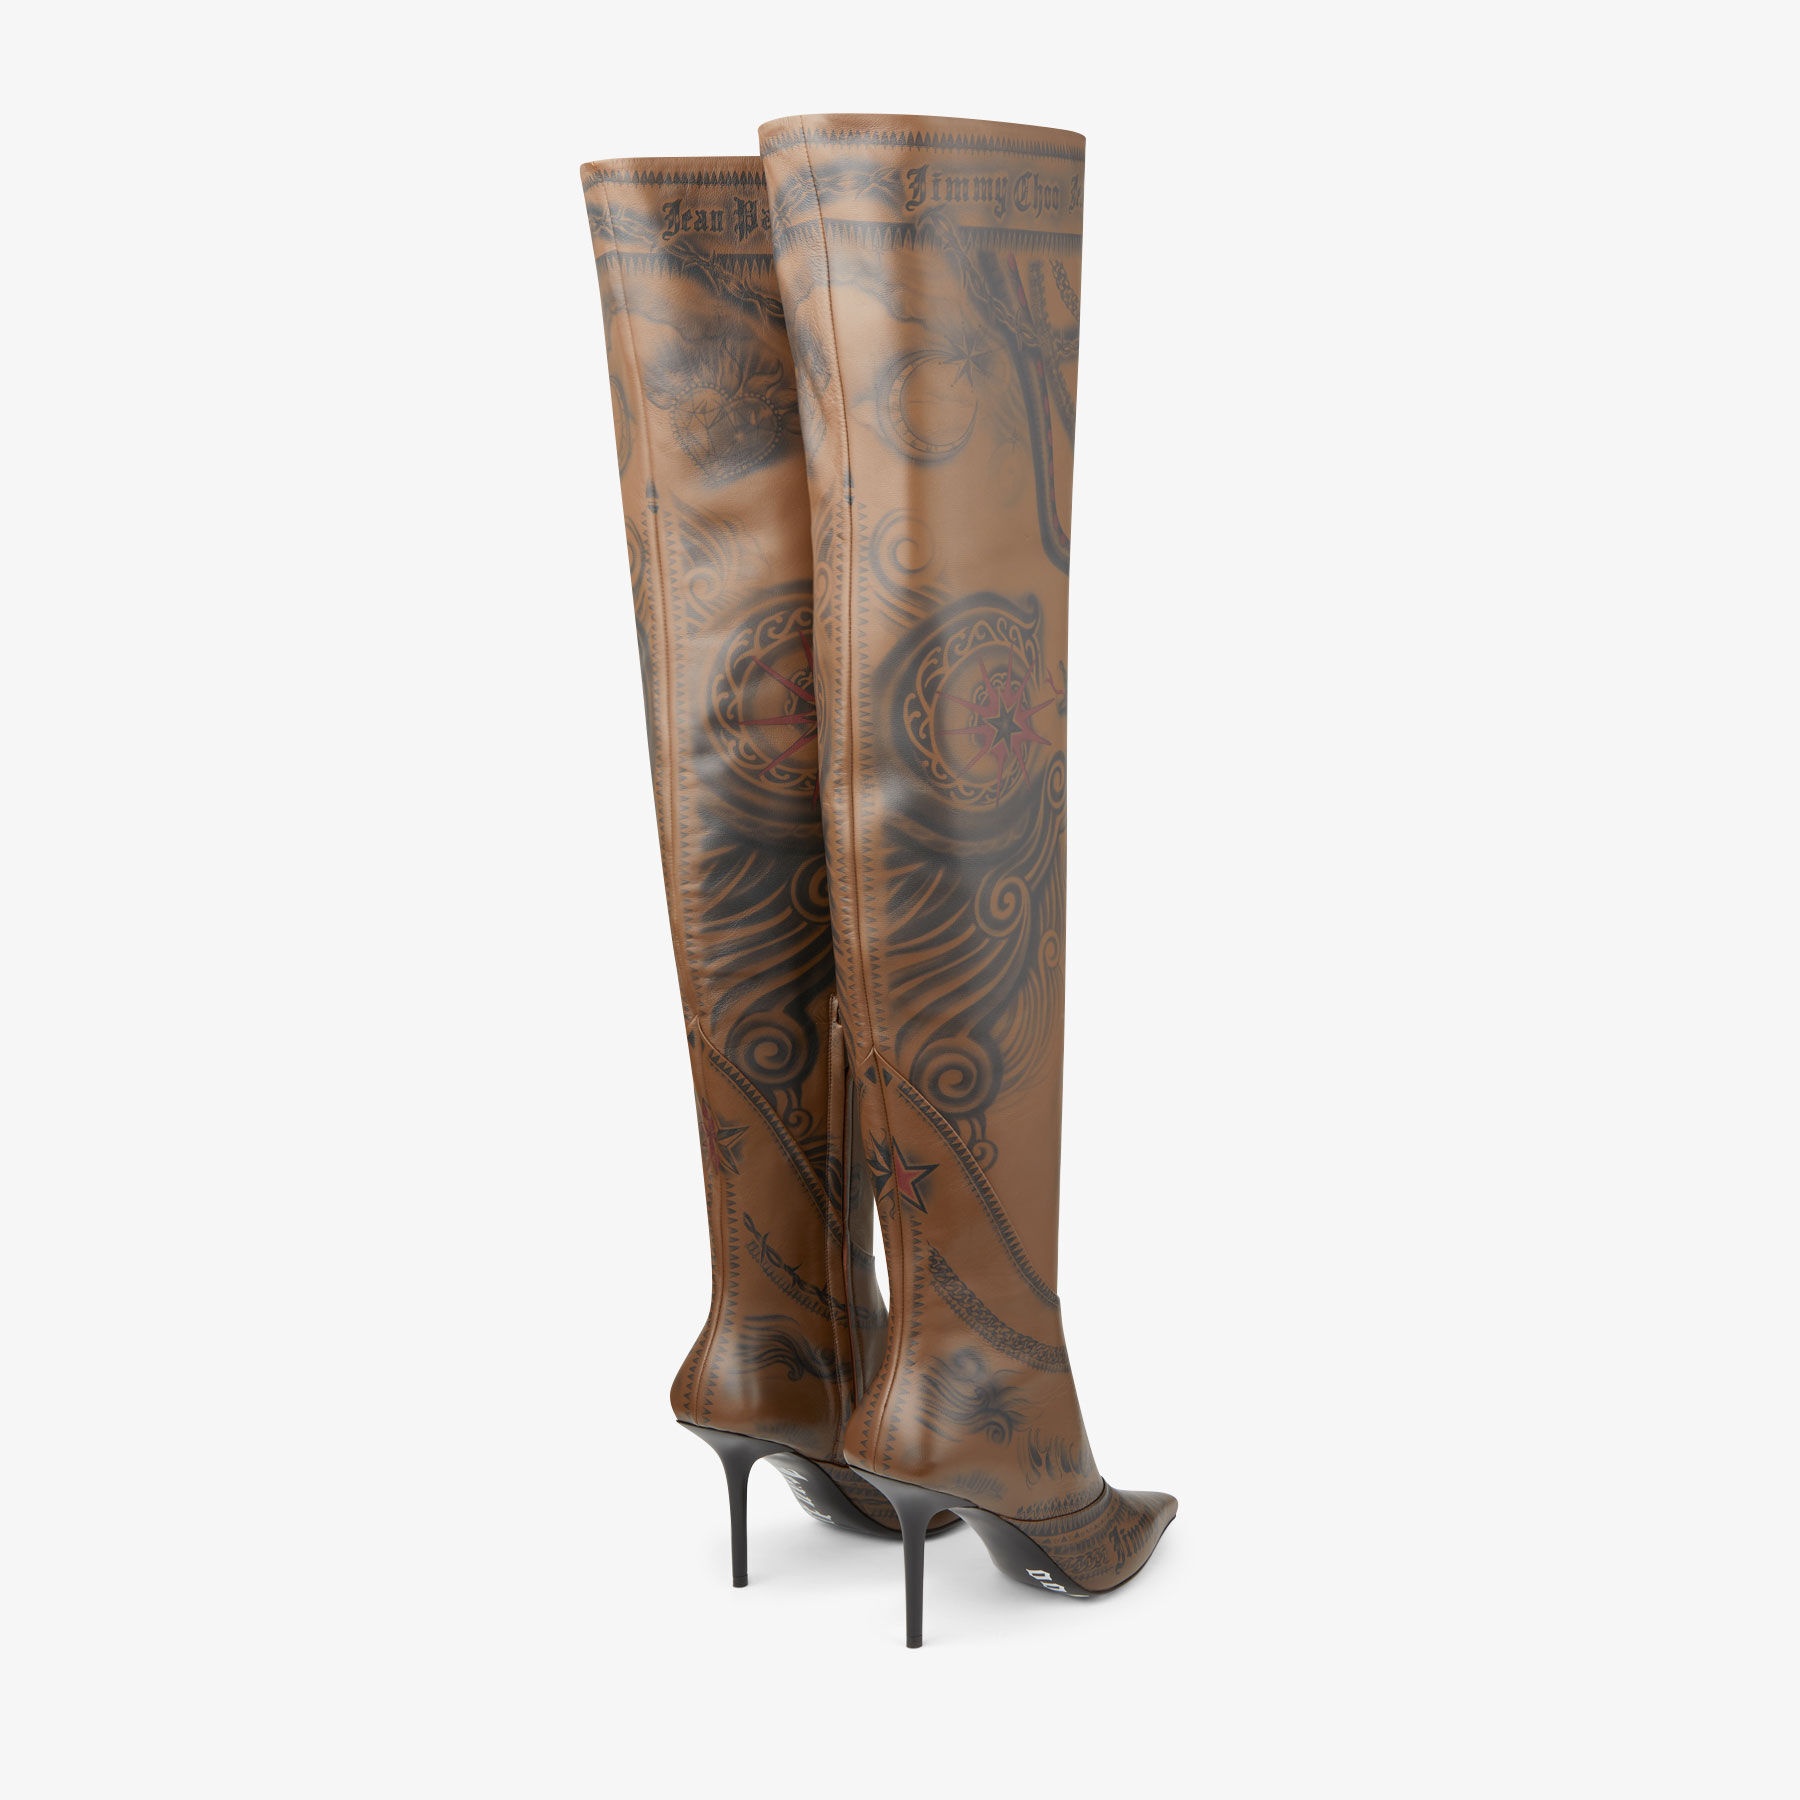 Jimmy Choo / Jean Paul Gaultier Over The Knee Boot 90
Clove Tattoo Printed Leather Over-The-Knee Boo - 5